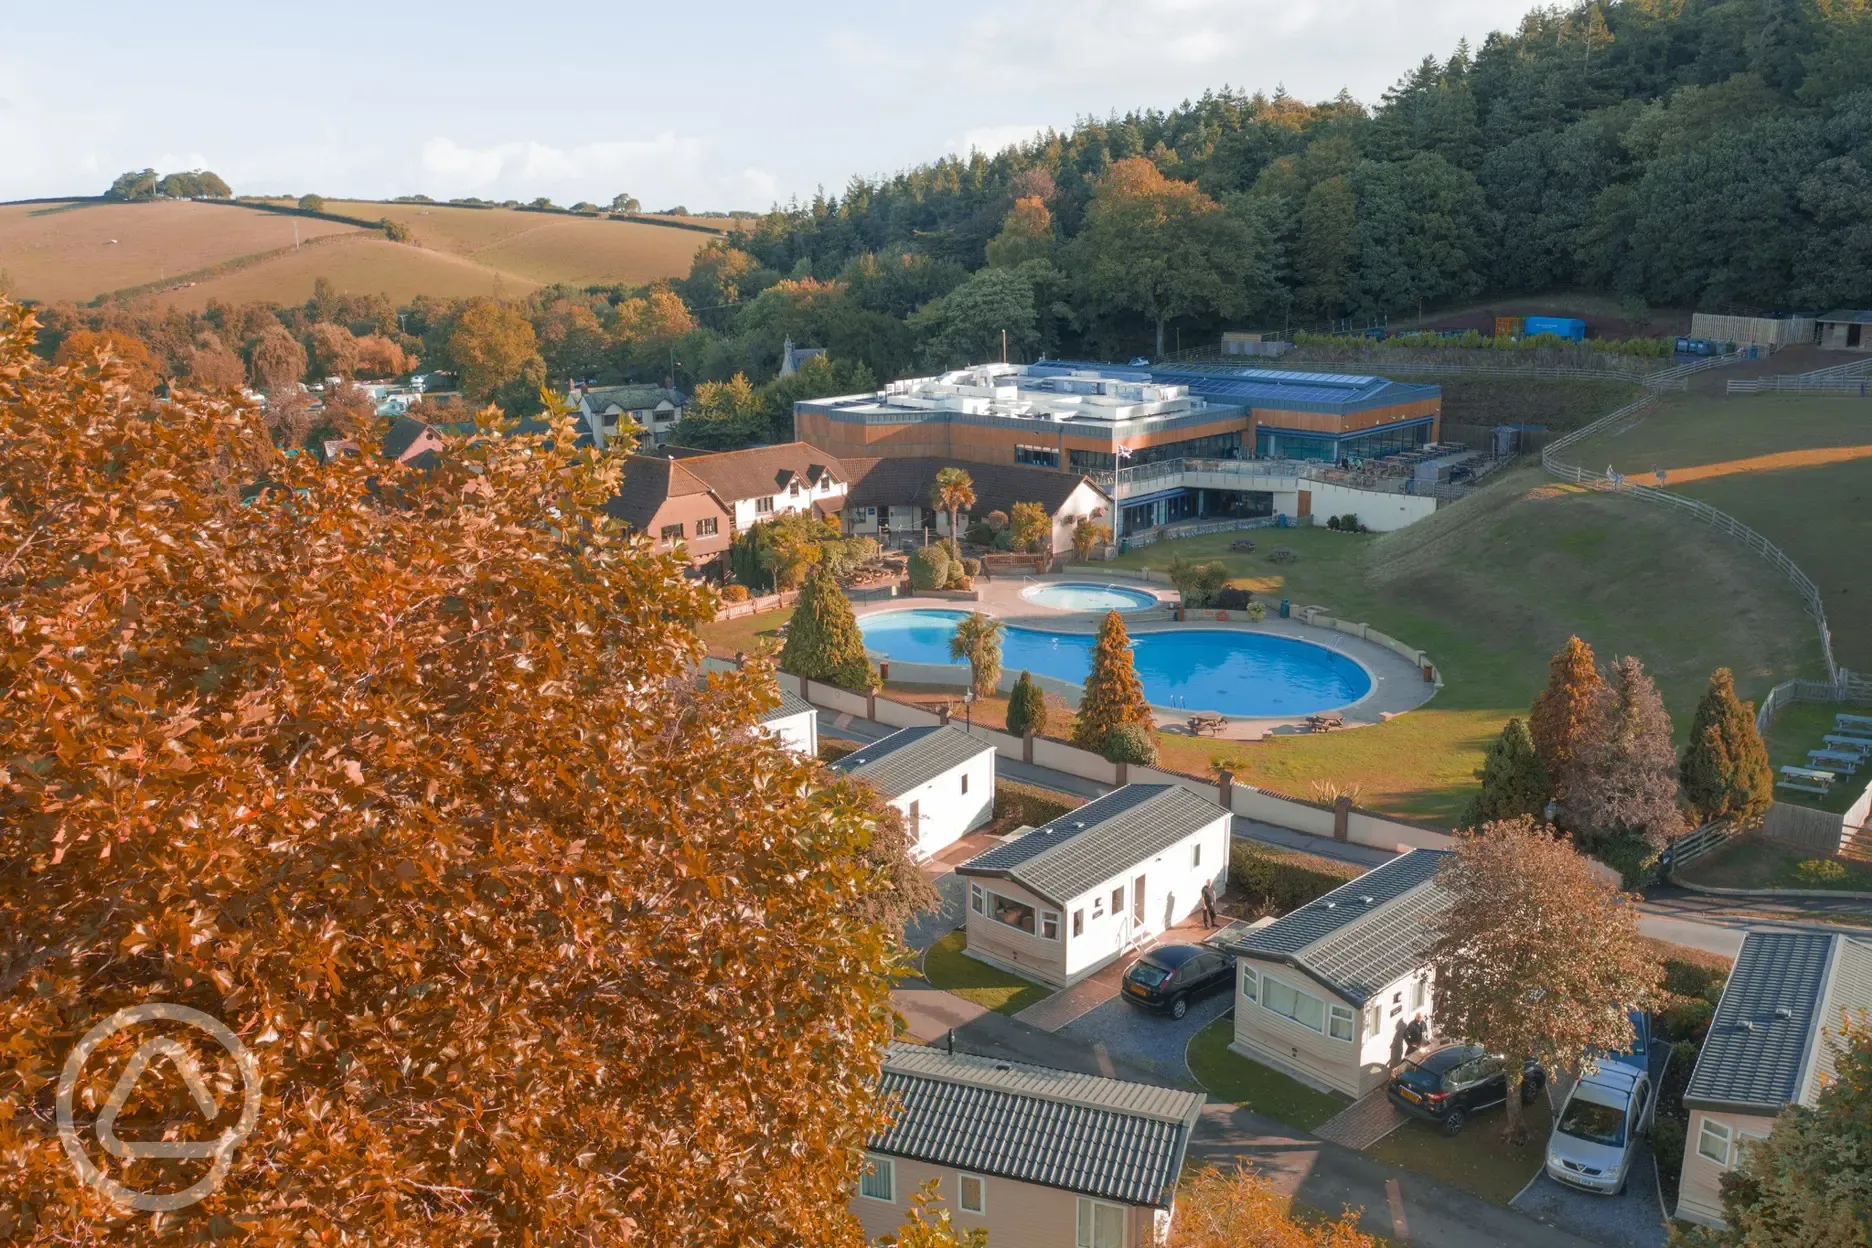 Aerial of the campsite and outdoor swimming pool